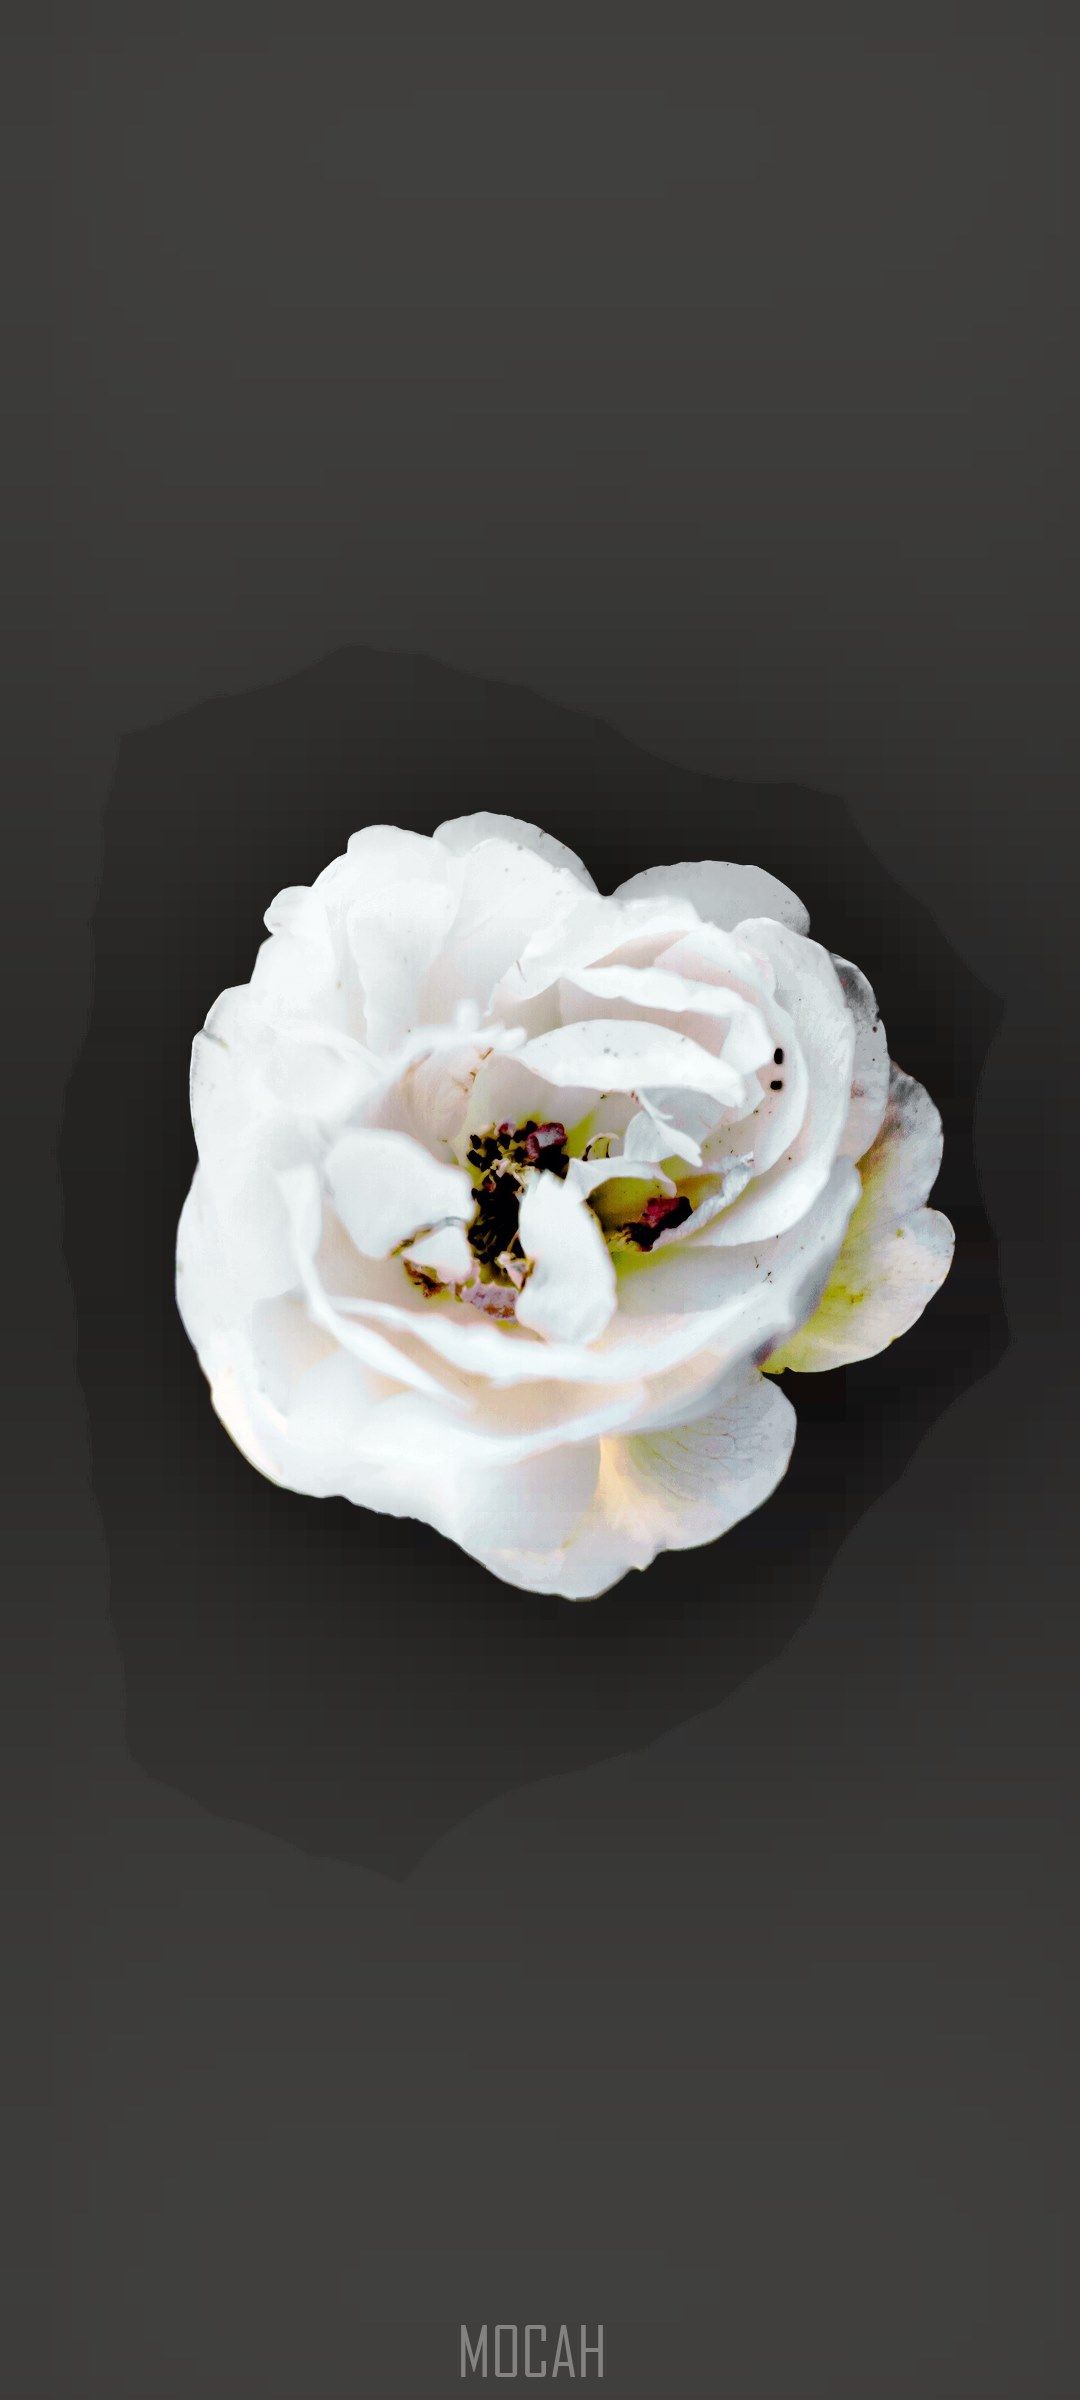 A white flower is sitting on top of the ground - Black rose, roses